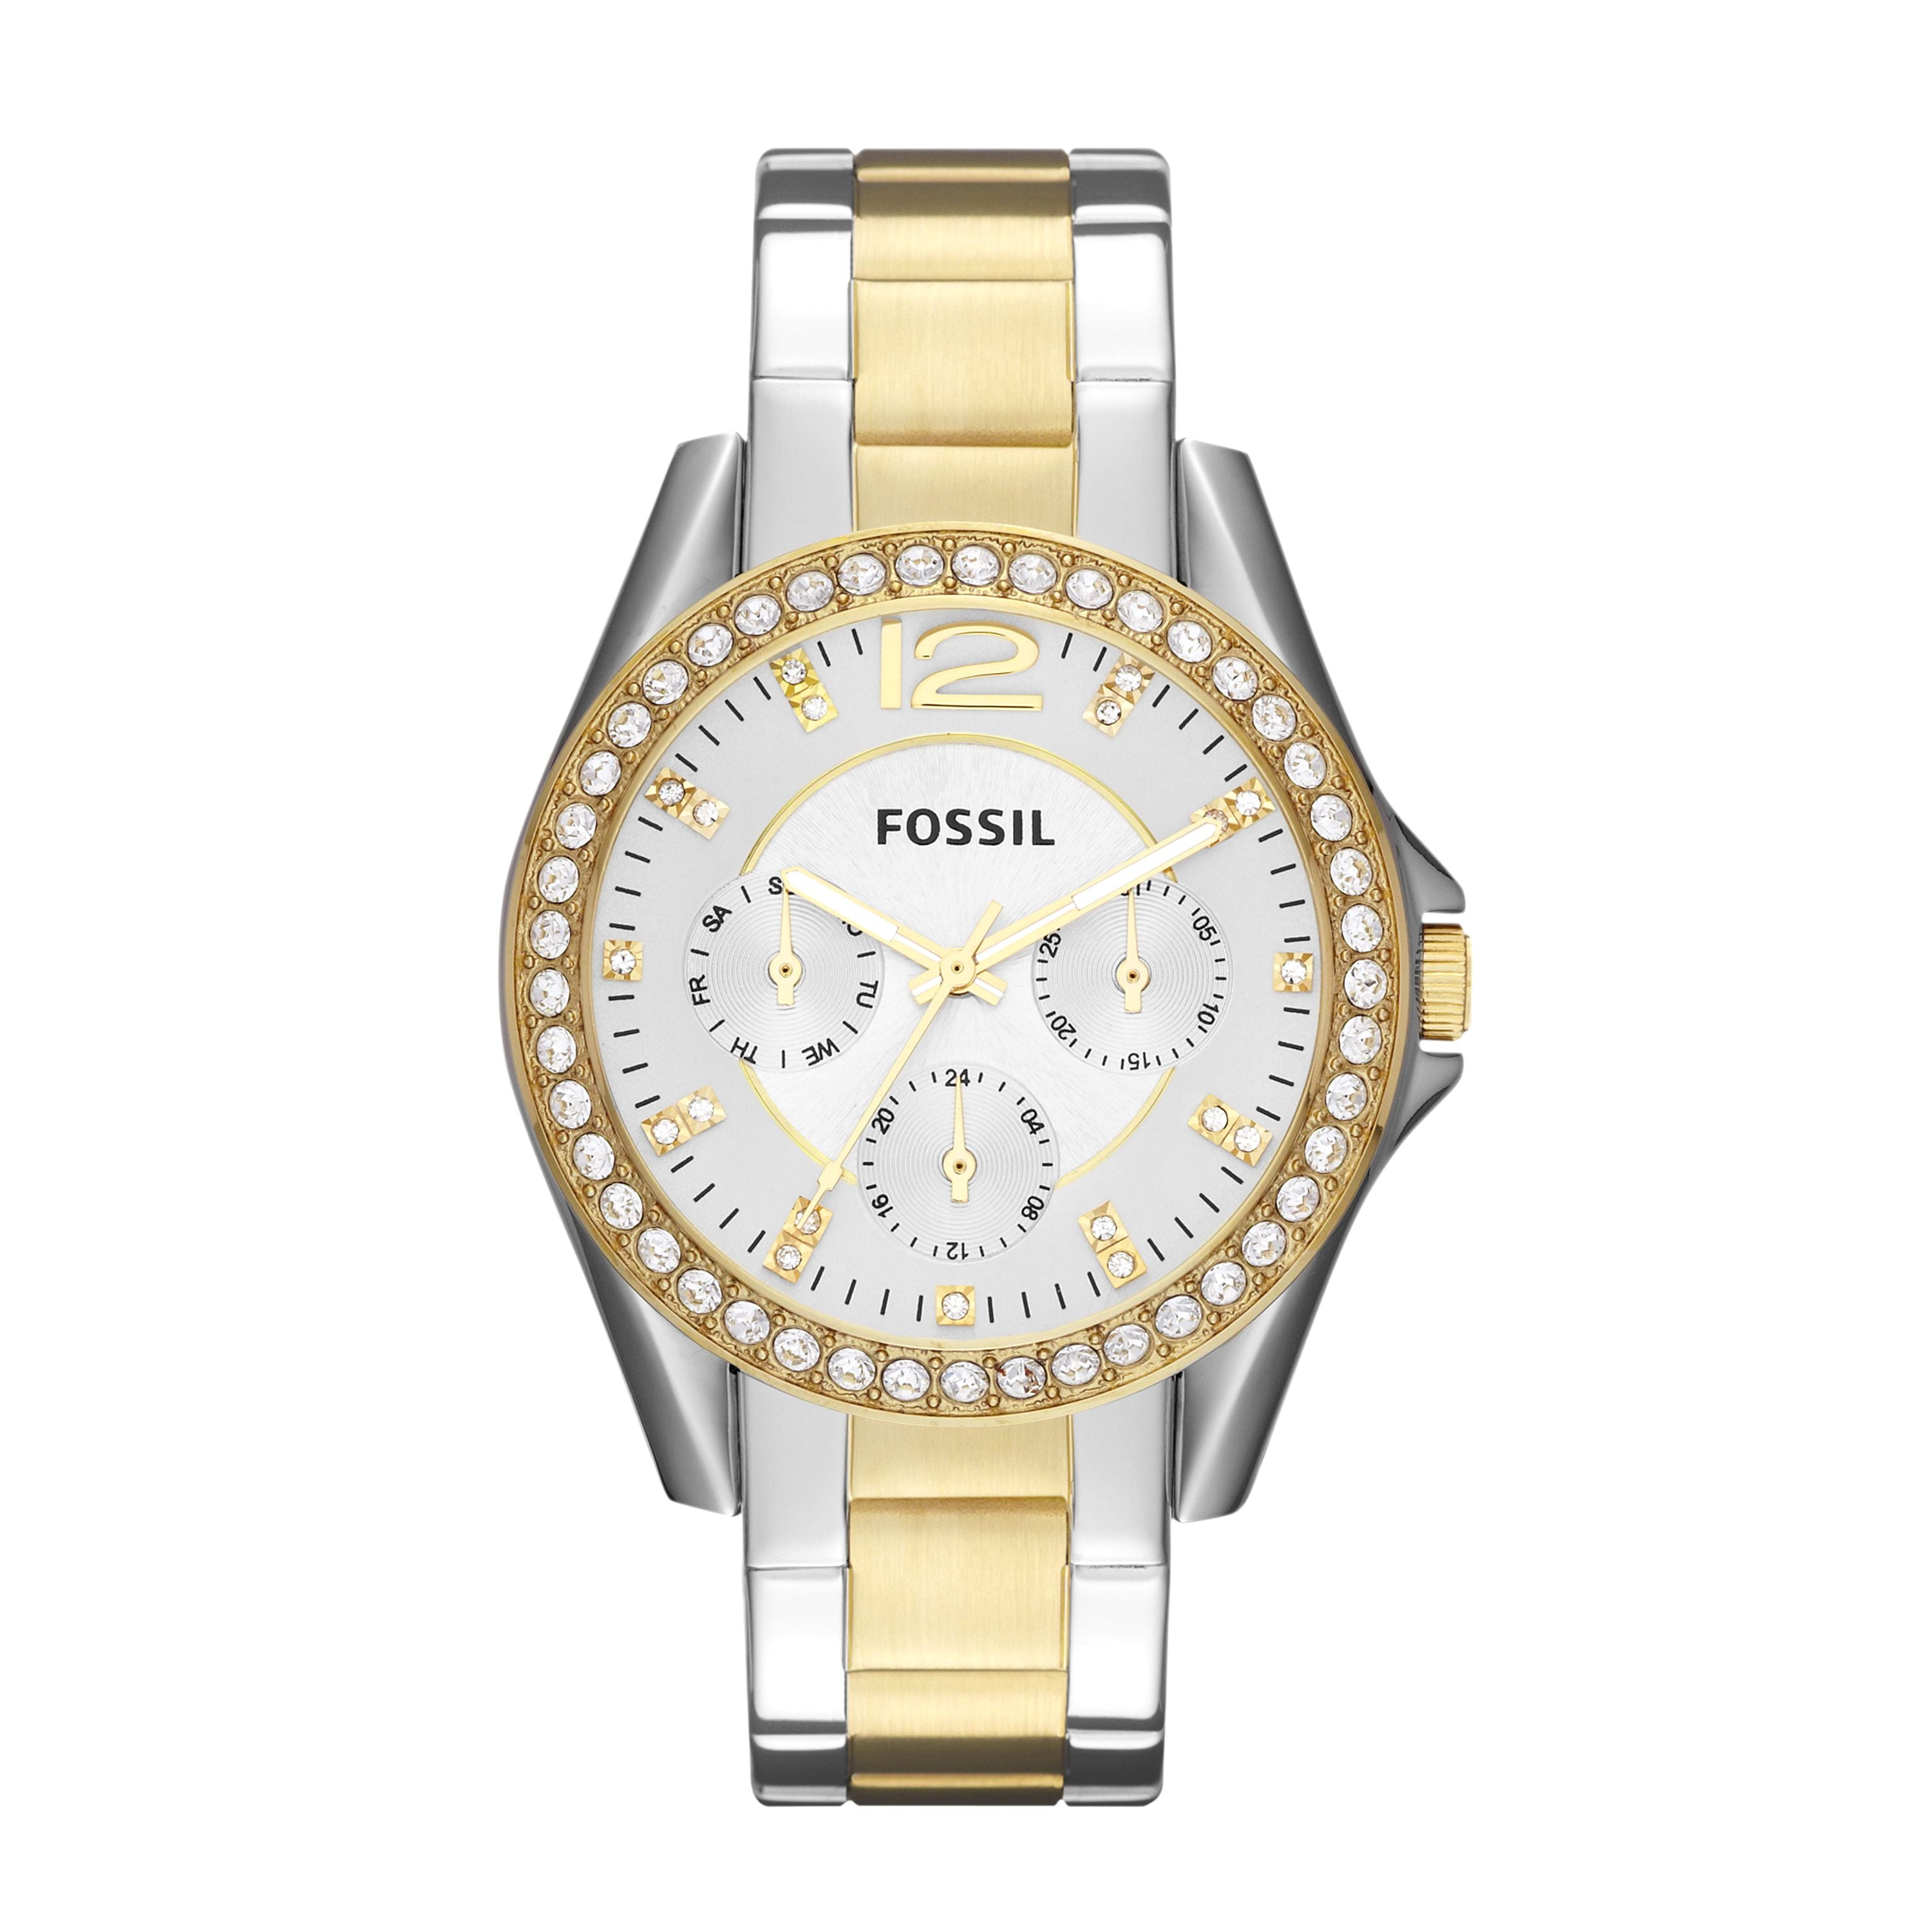 Fossil Women's Riley Multifunction, Two-Tone-Tone Stainless Steel Watch